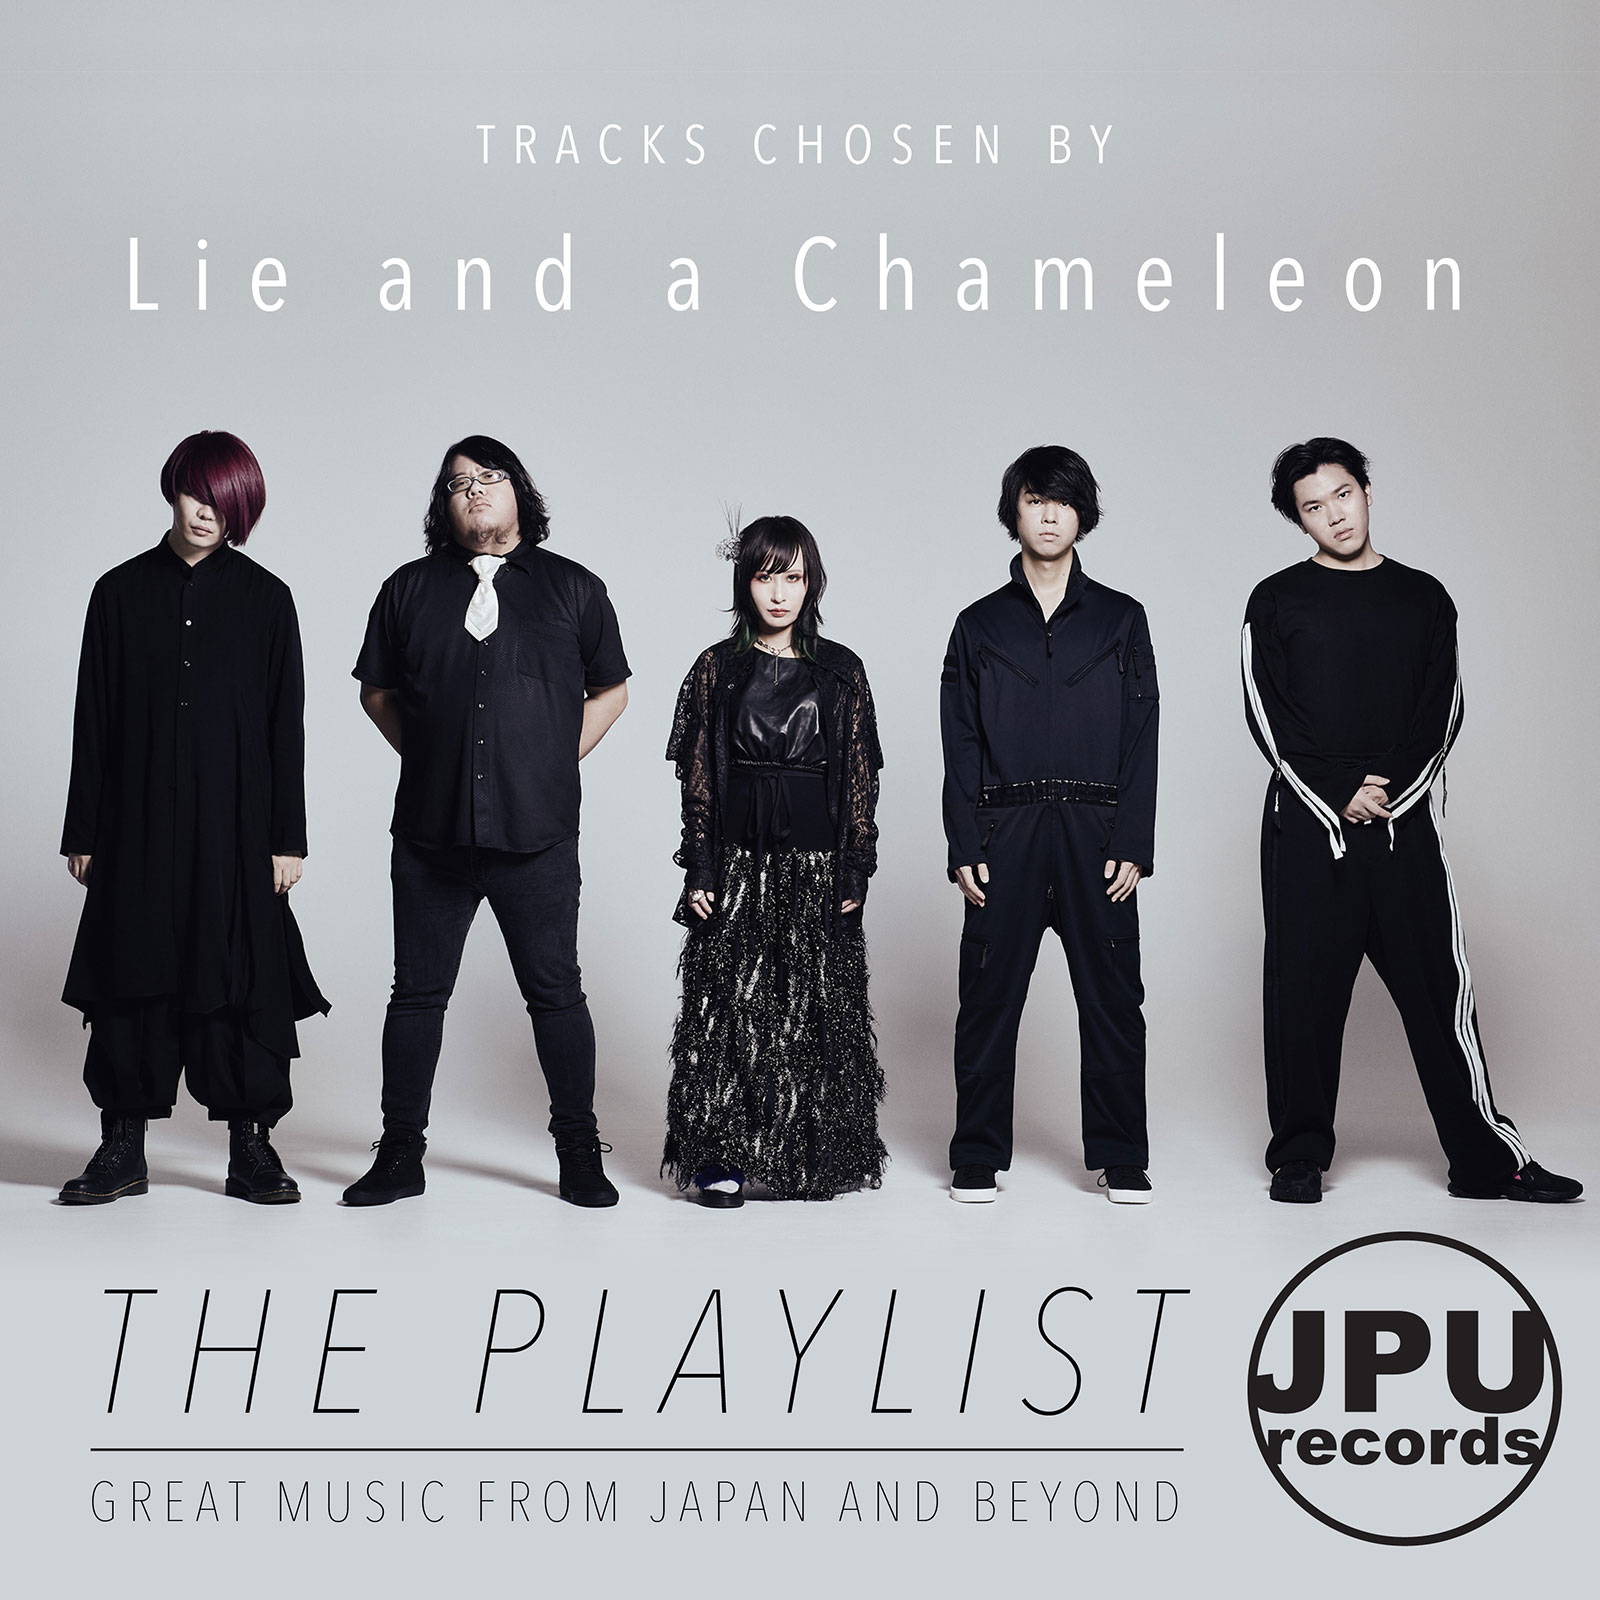 Lie and a Chameleon Playlist 嘘とカメレオン Japanese anime song band // JPU Records